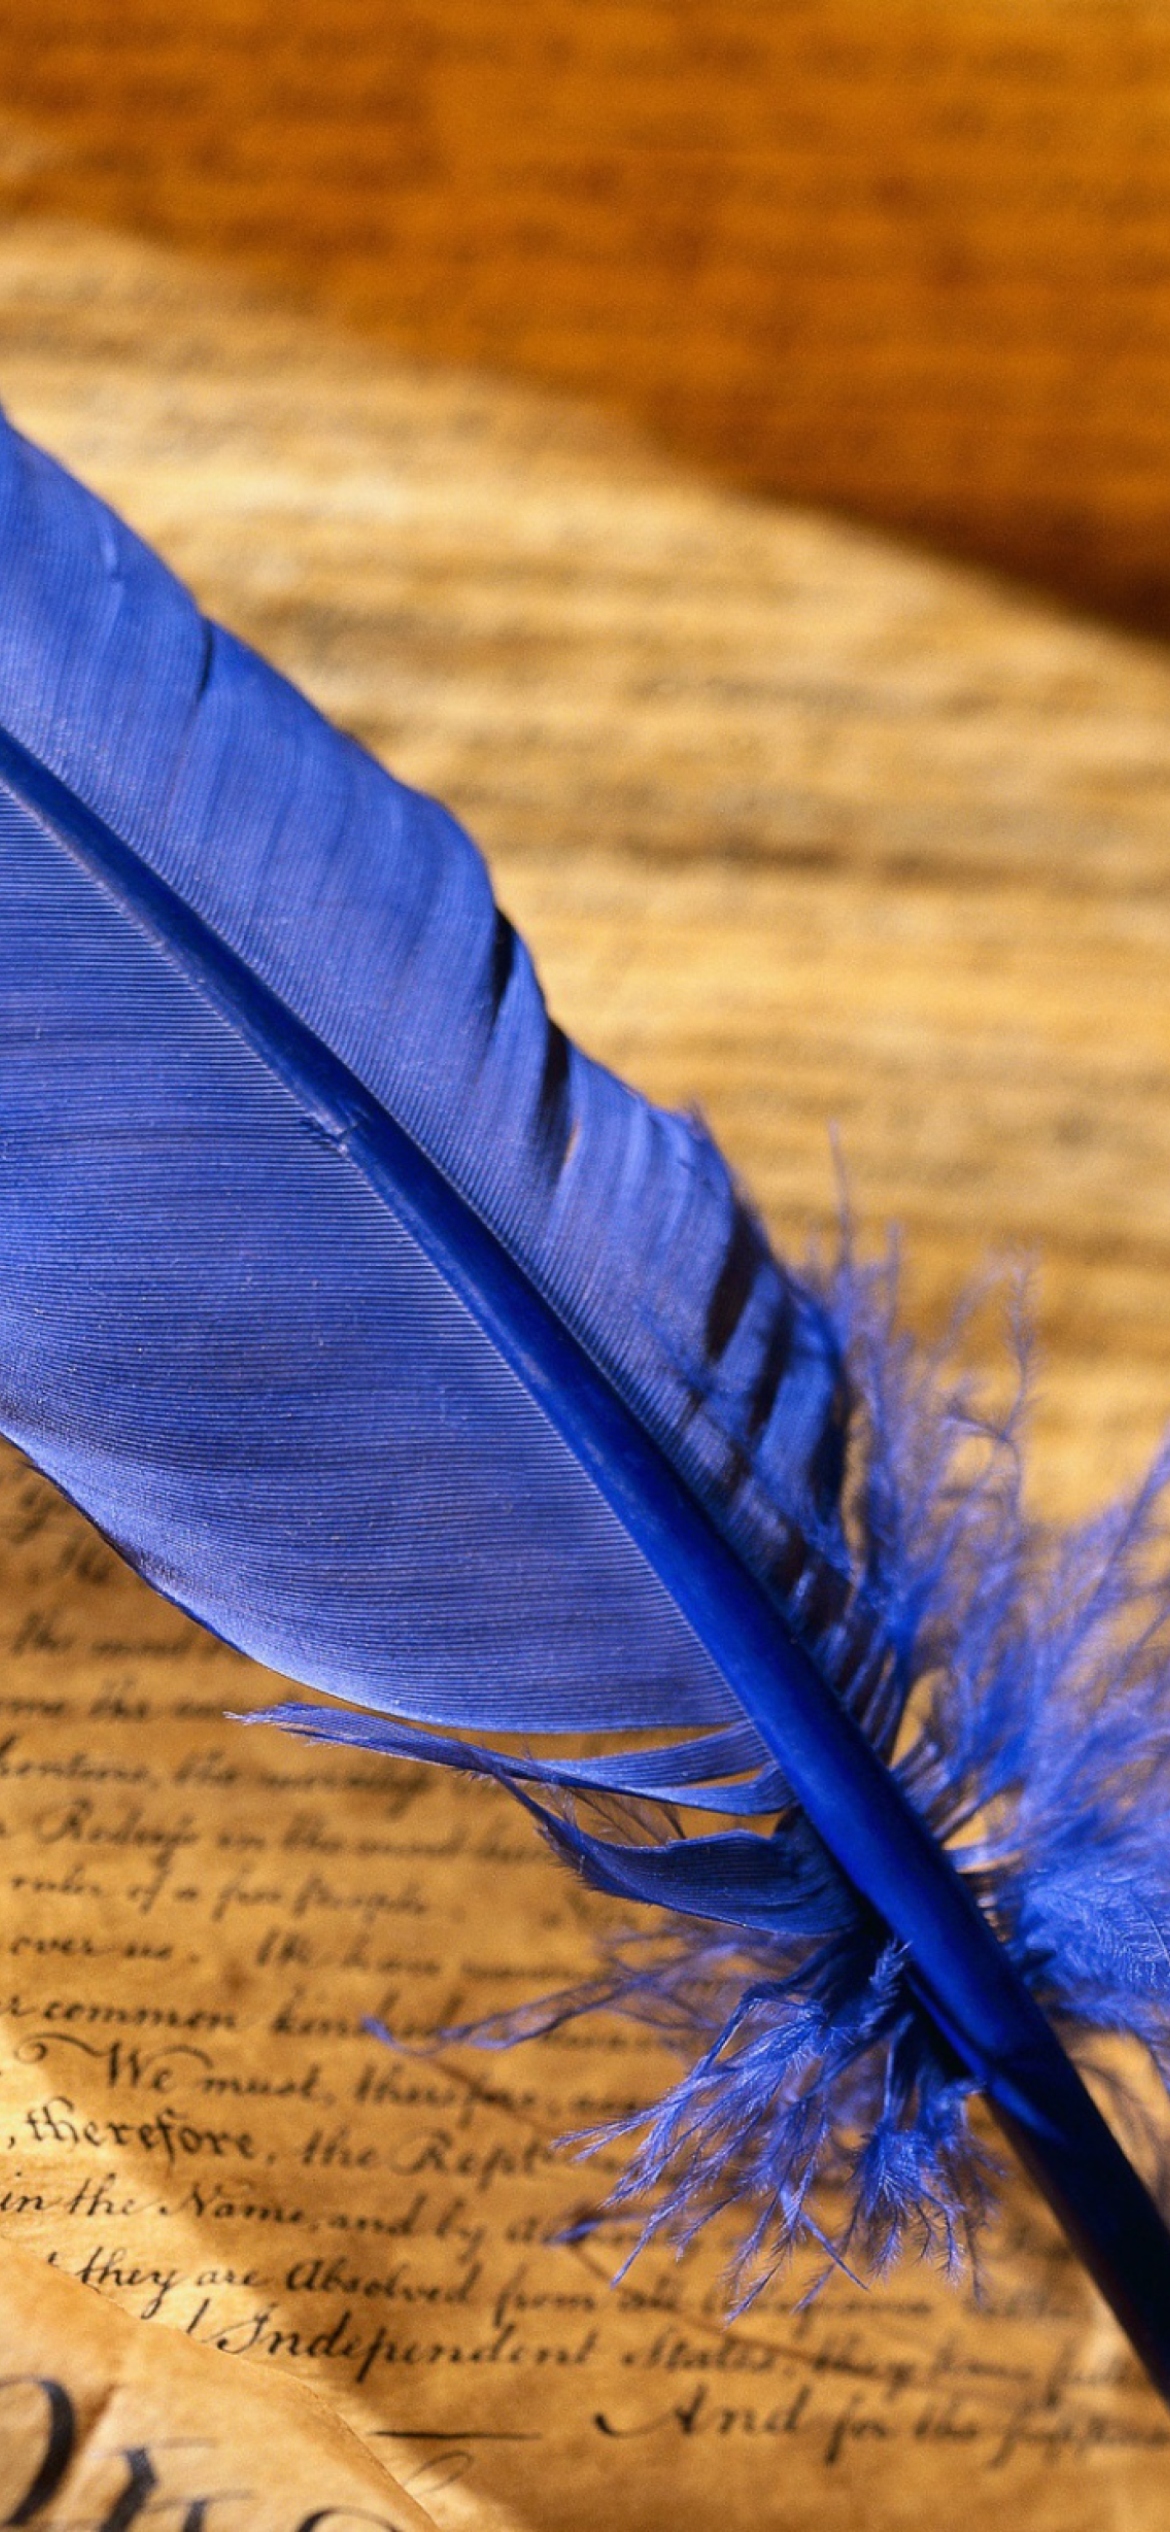 Blue Writing Feather wallpaper 1170x2532